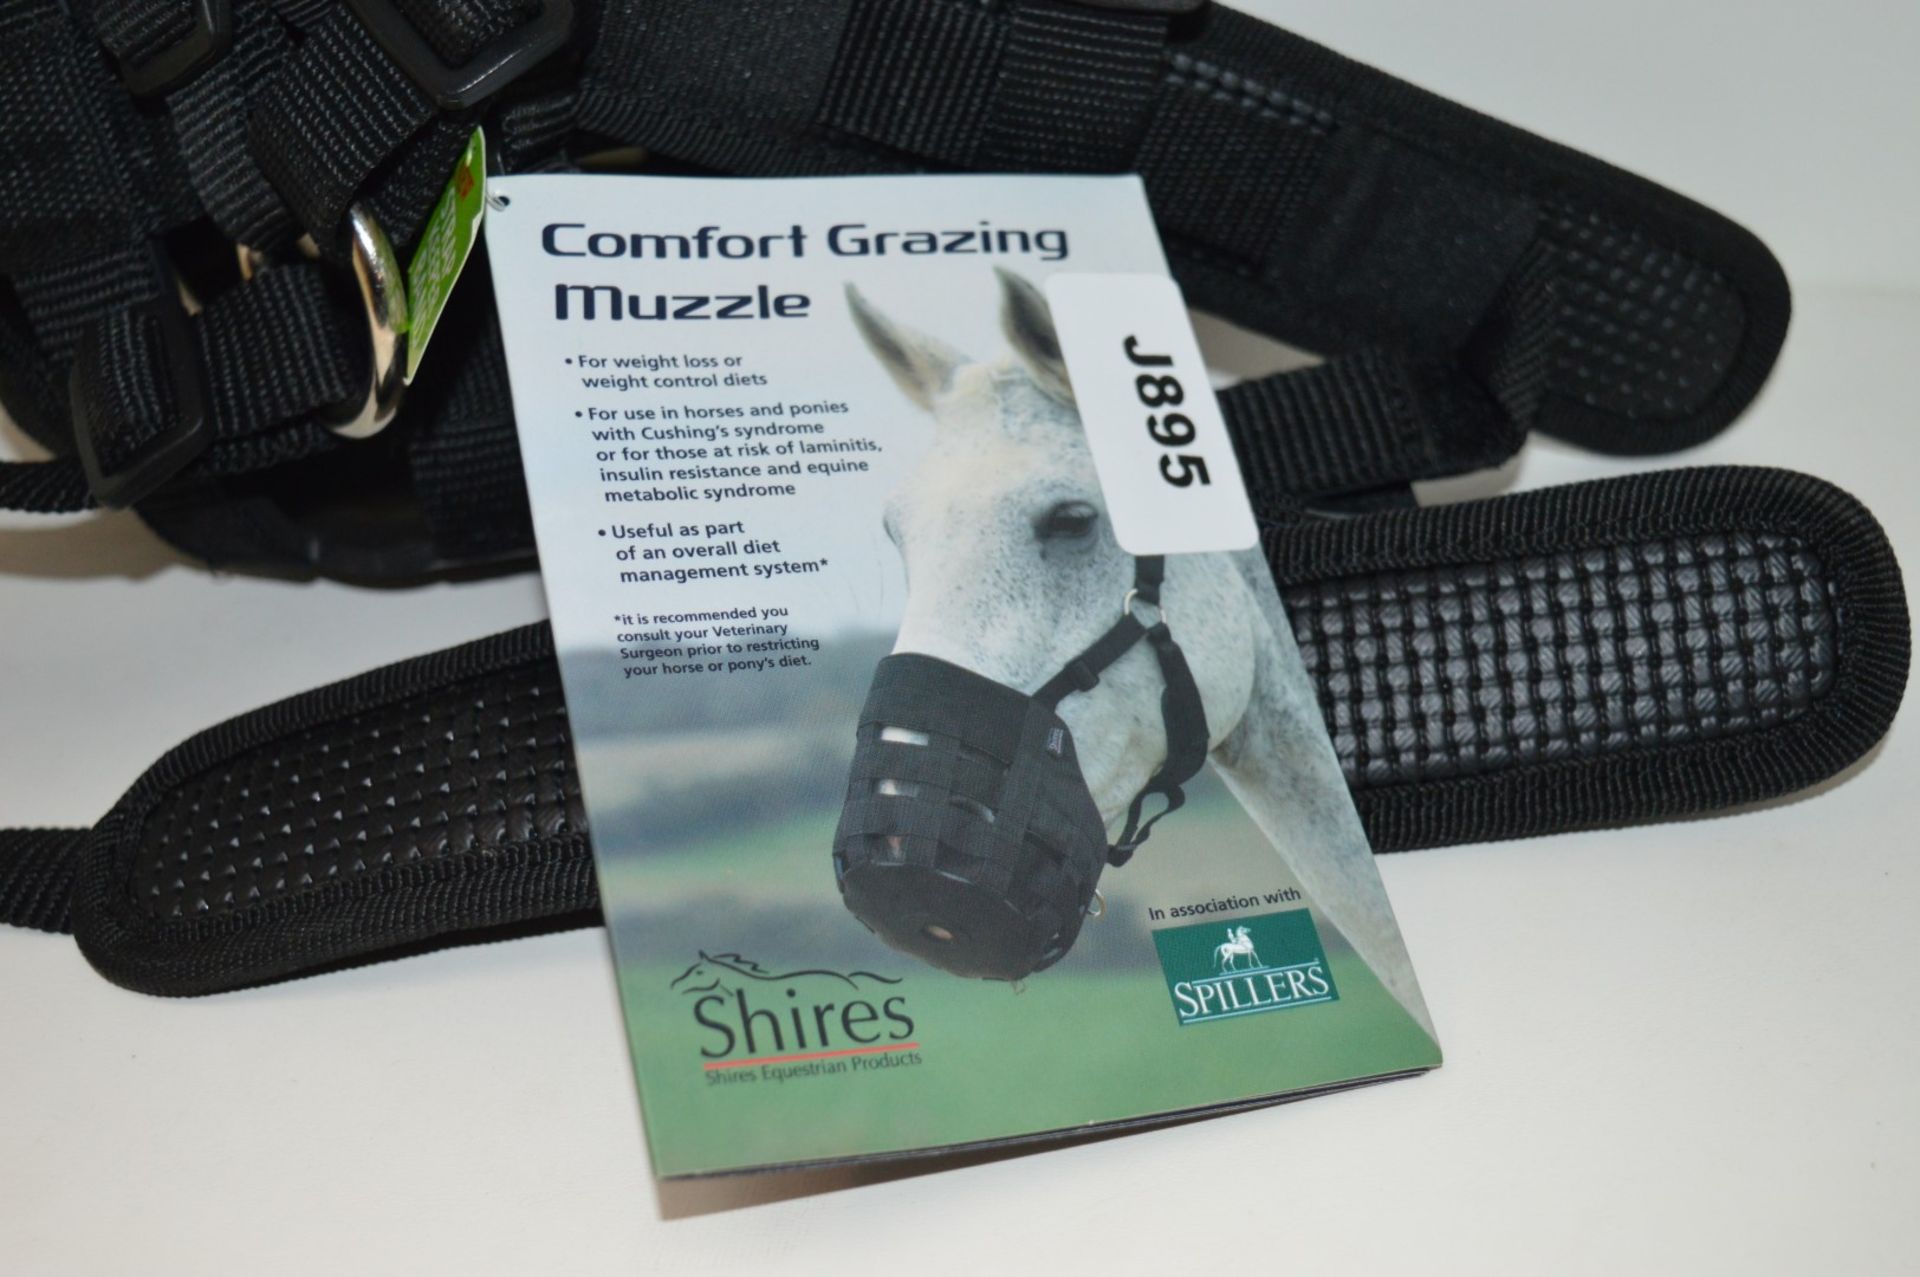 1 x Shires Comfort Grazing Muzzle - Cob 495N Black - New Stock - CL401 - Ref J895 - Location: - Image 3 of 4